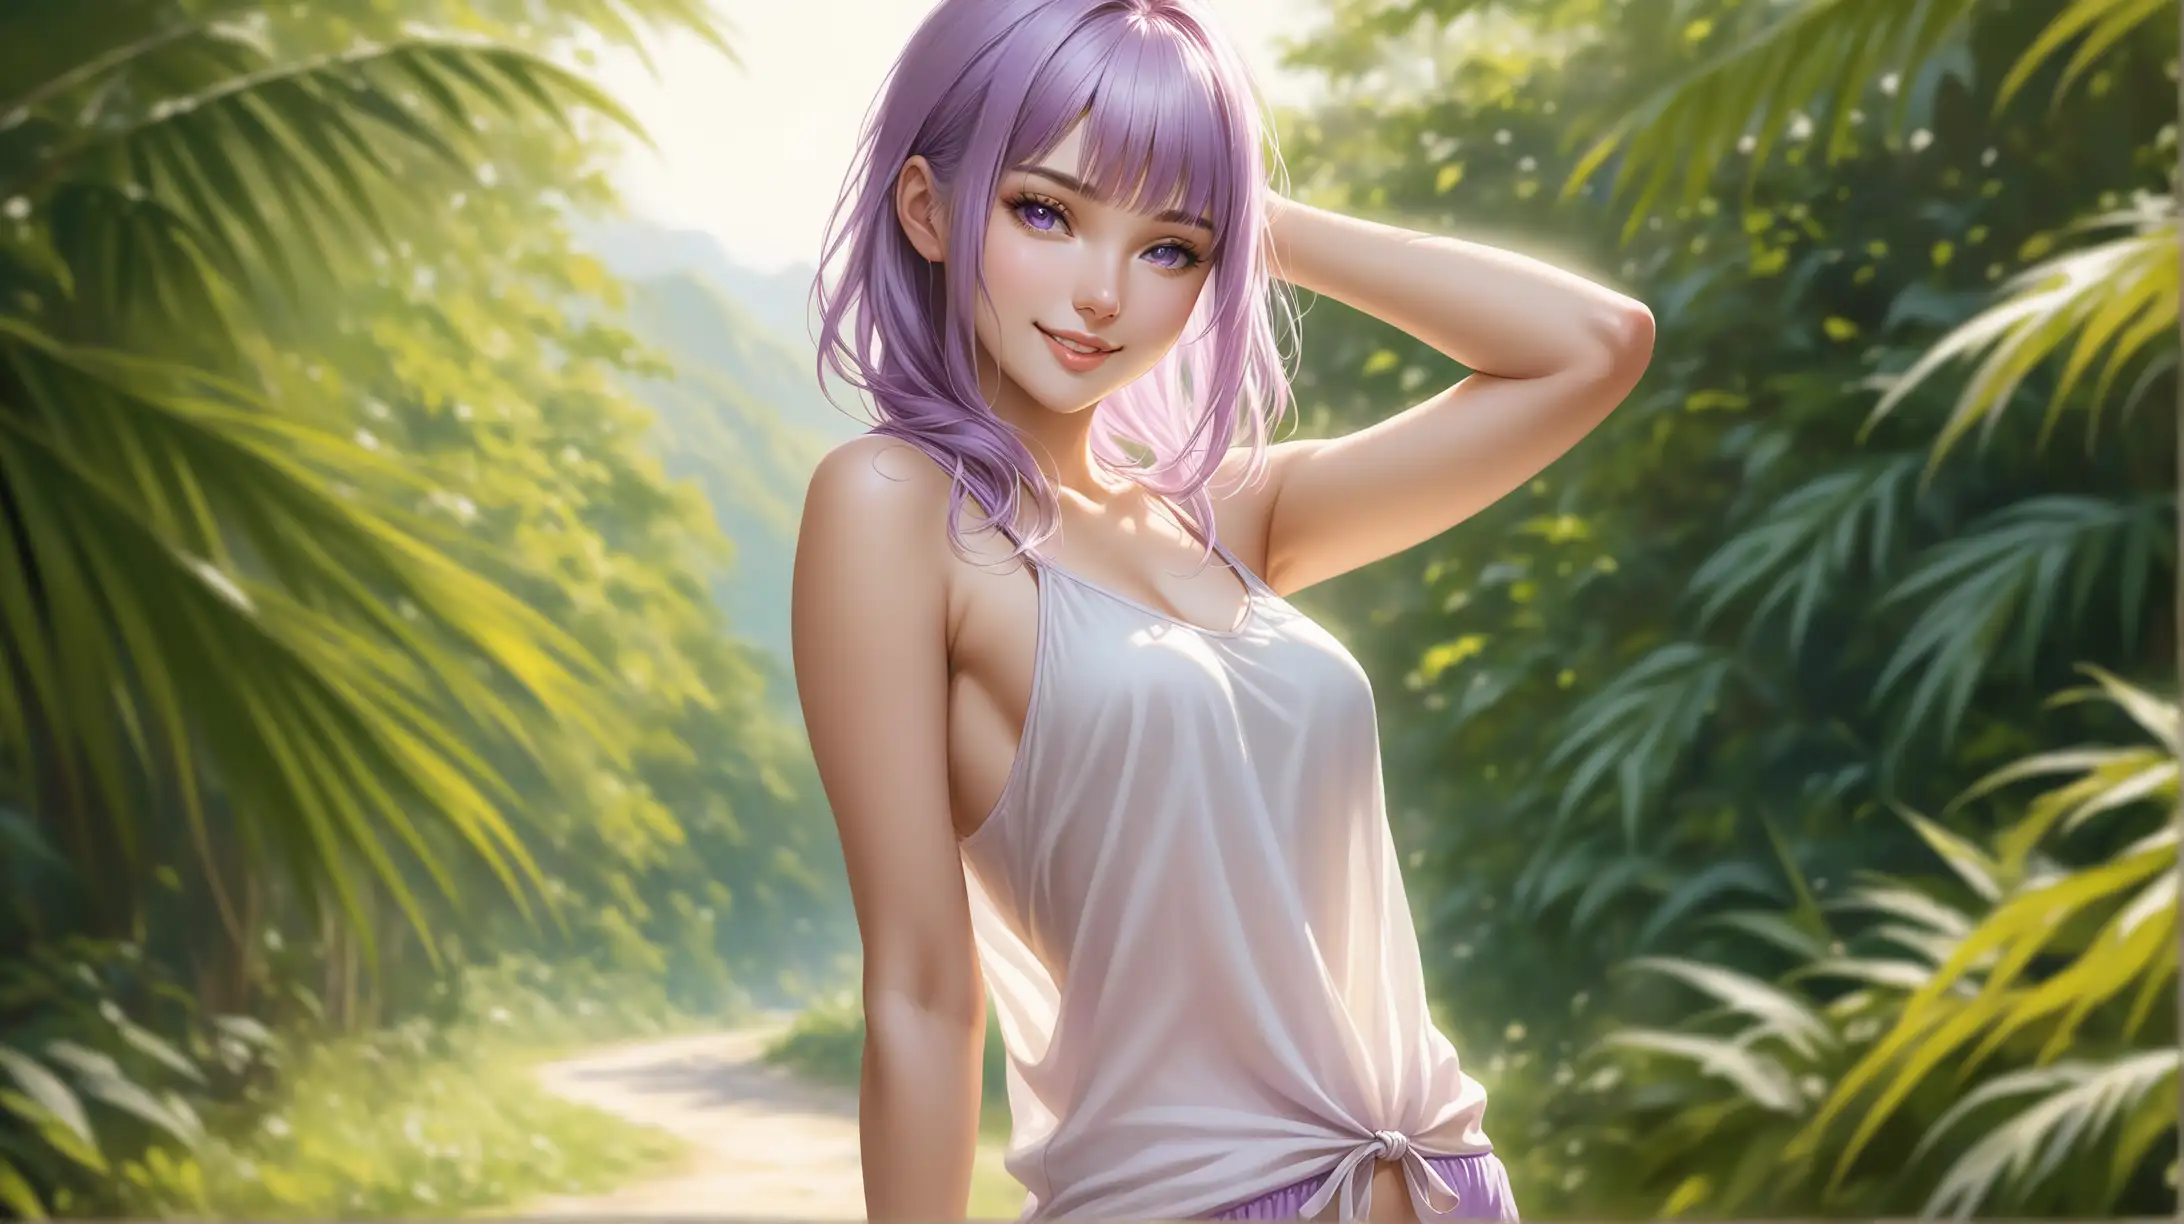 Smiling Woman with Short Light Purple Hair in Summer Outfit